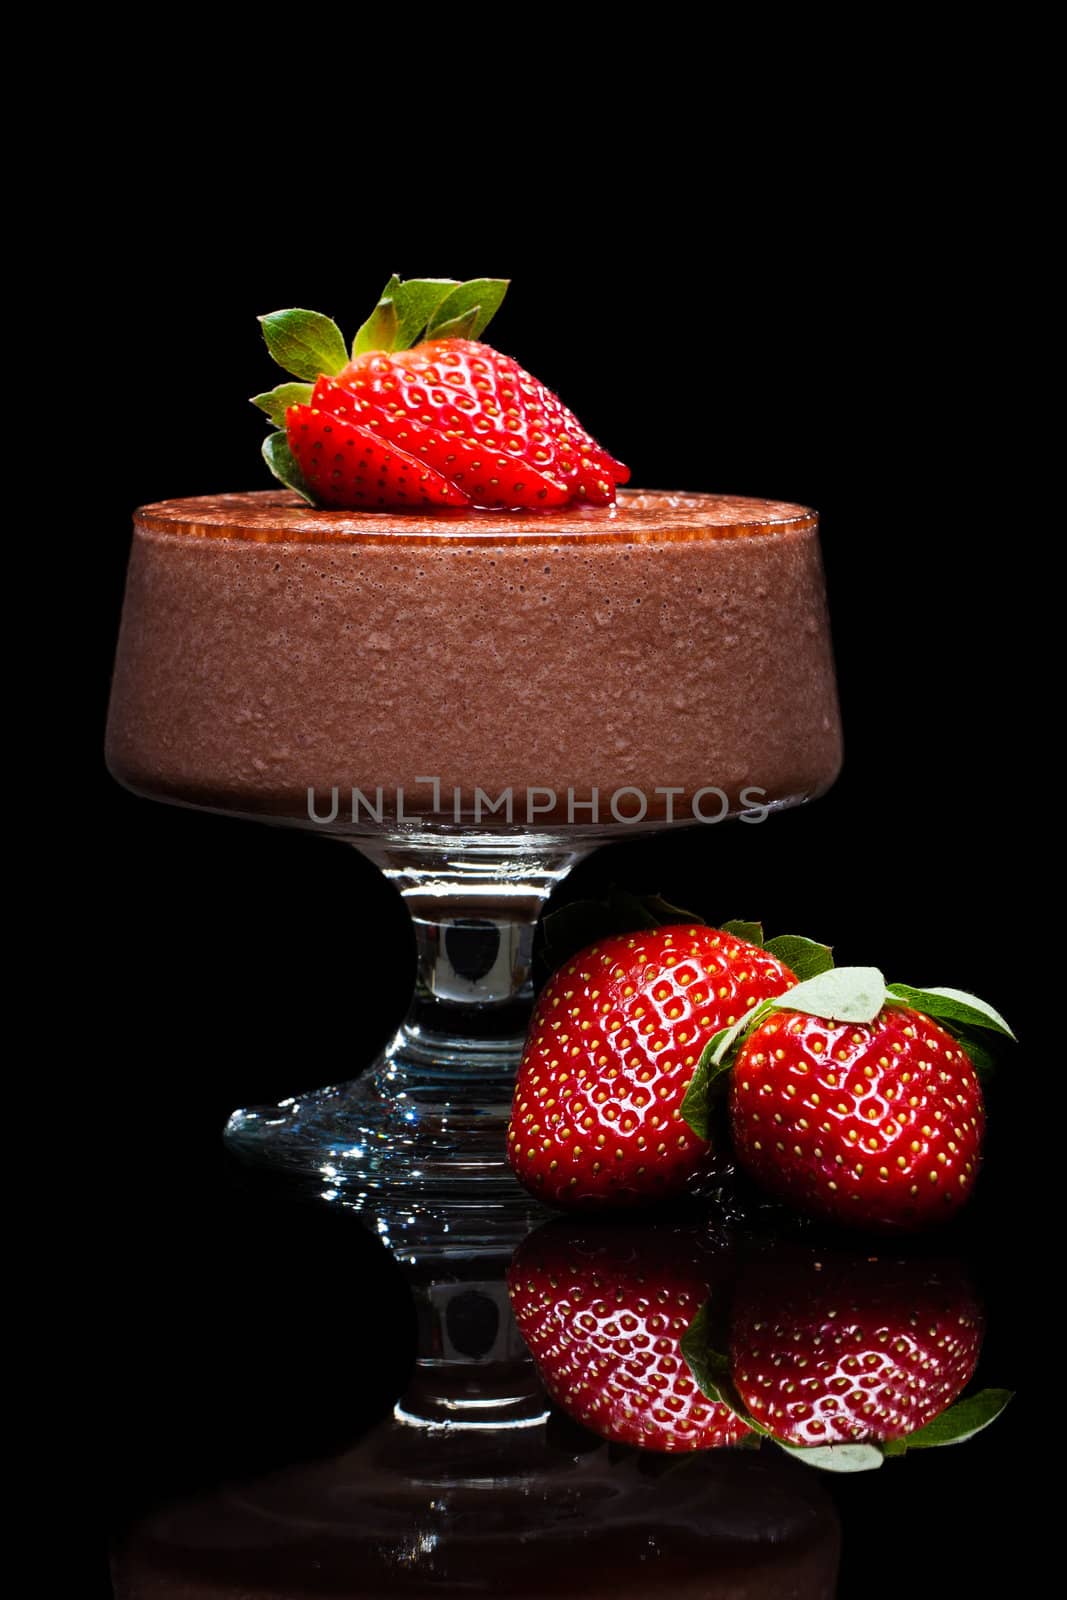 Chocolate mousee dessert with strawberries by Jaykayl